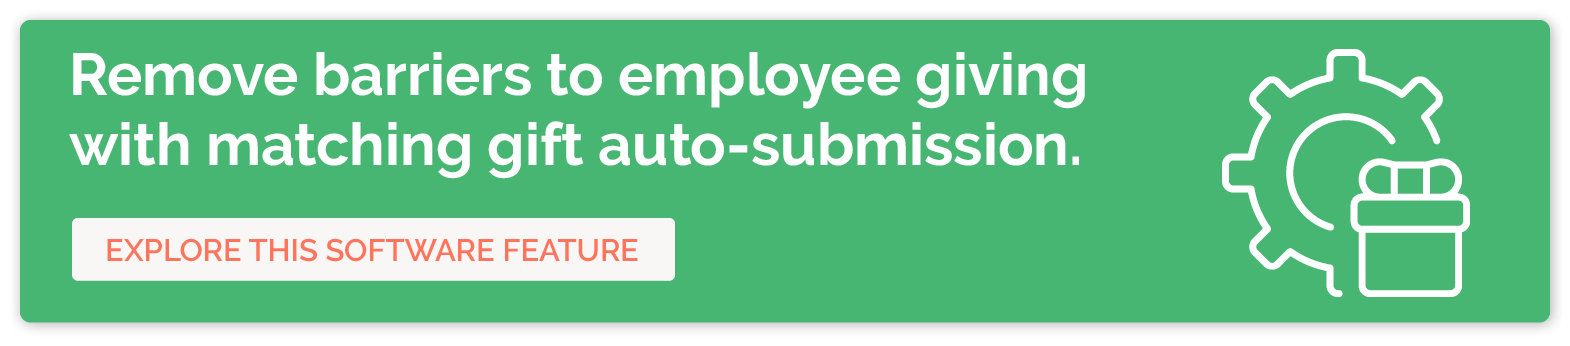 Click to learn more about matching gift auto-submission and how it can support your employee engagement efforts.